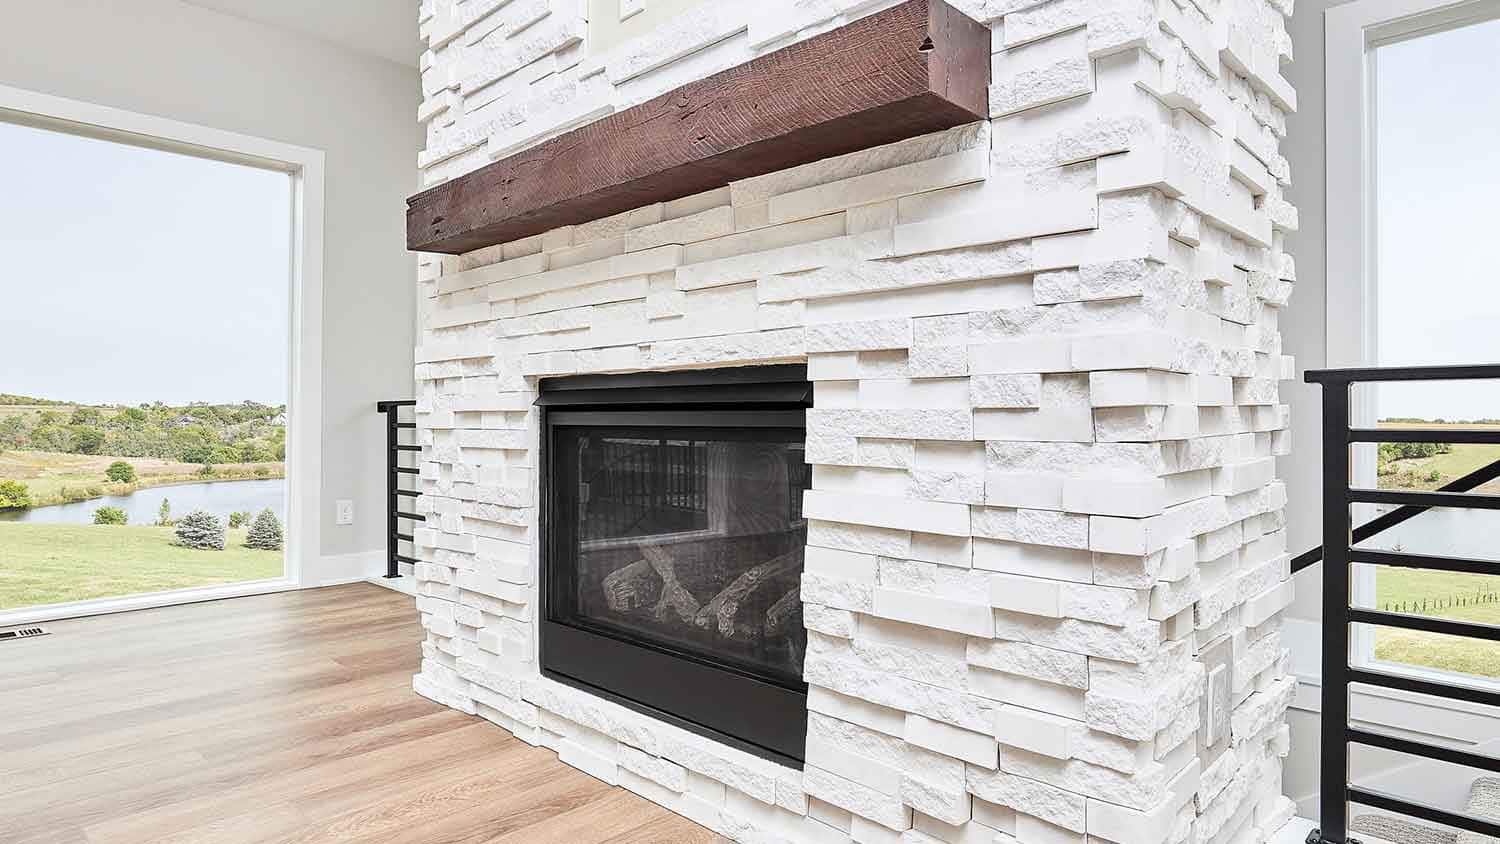 Where To Buy Stacked Stone For Fireplace 1696427997 